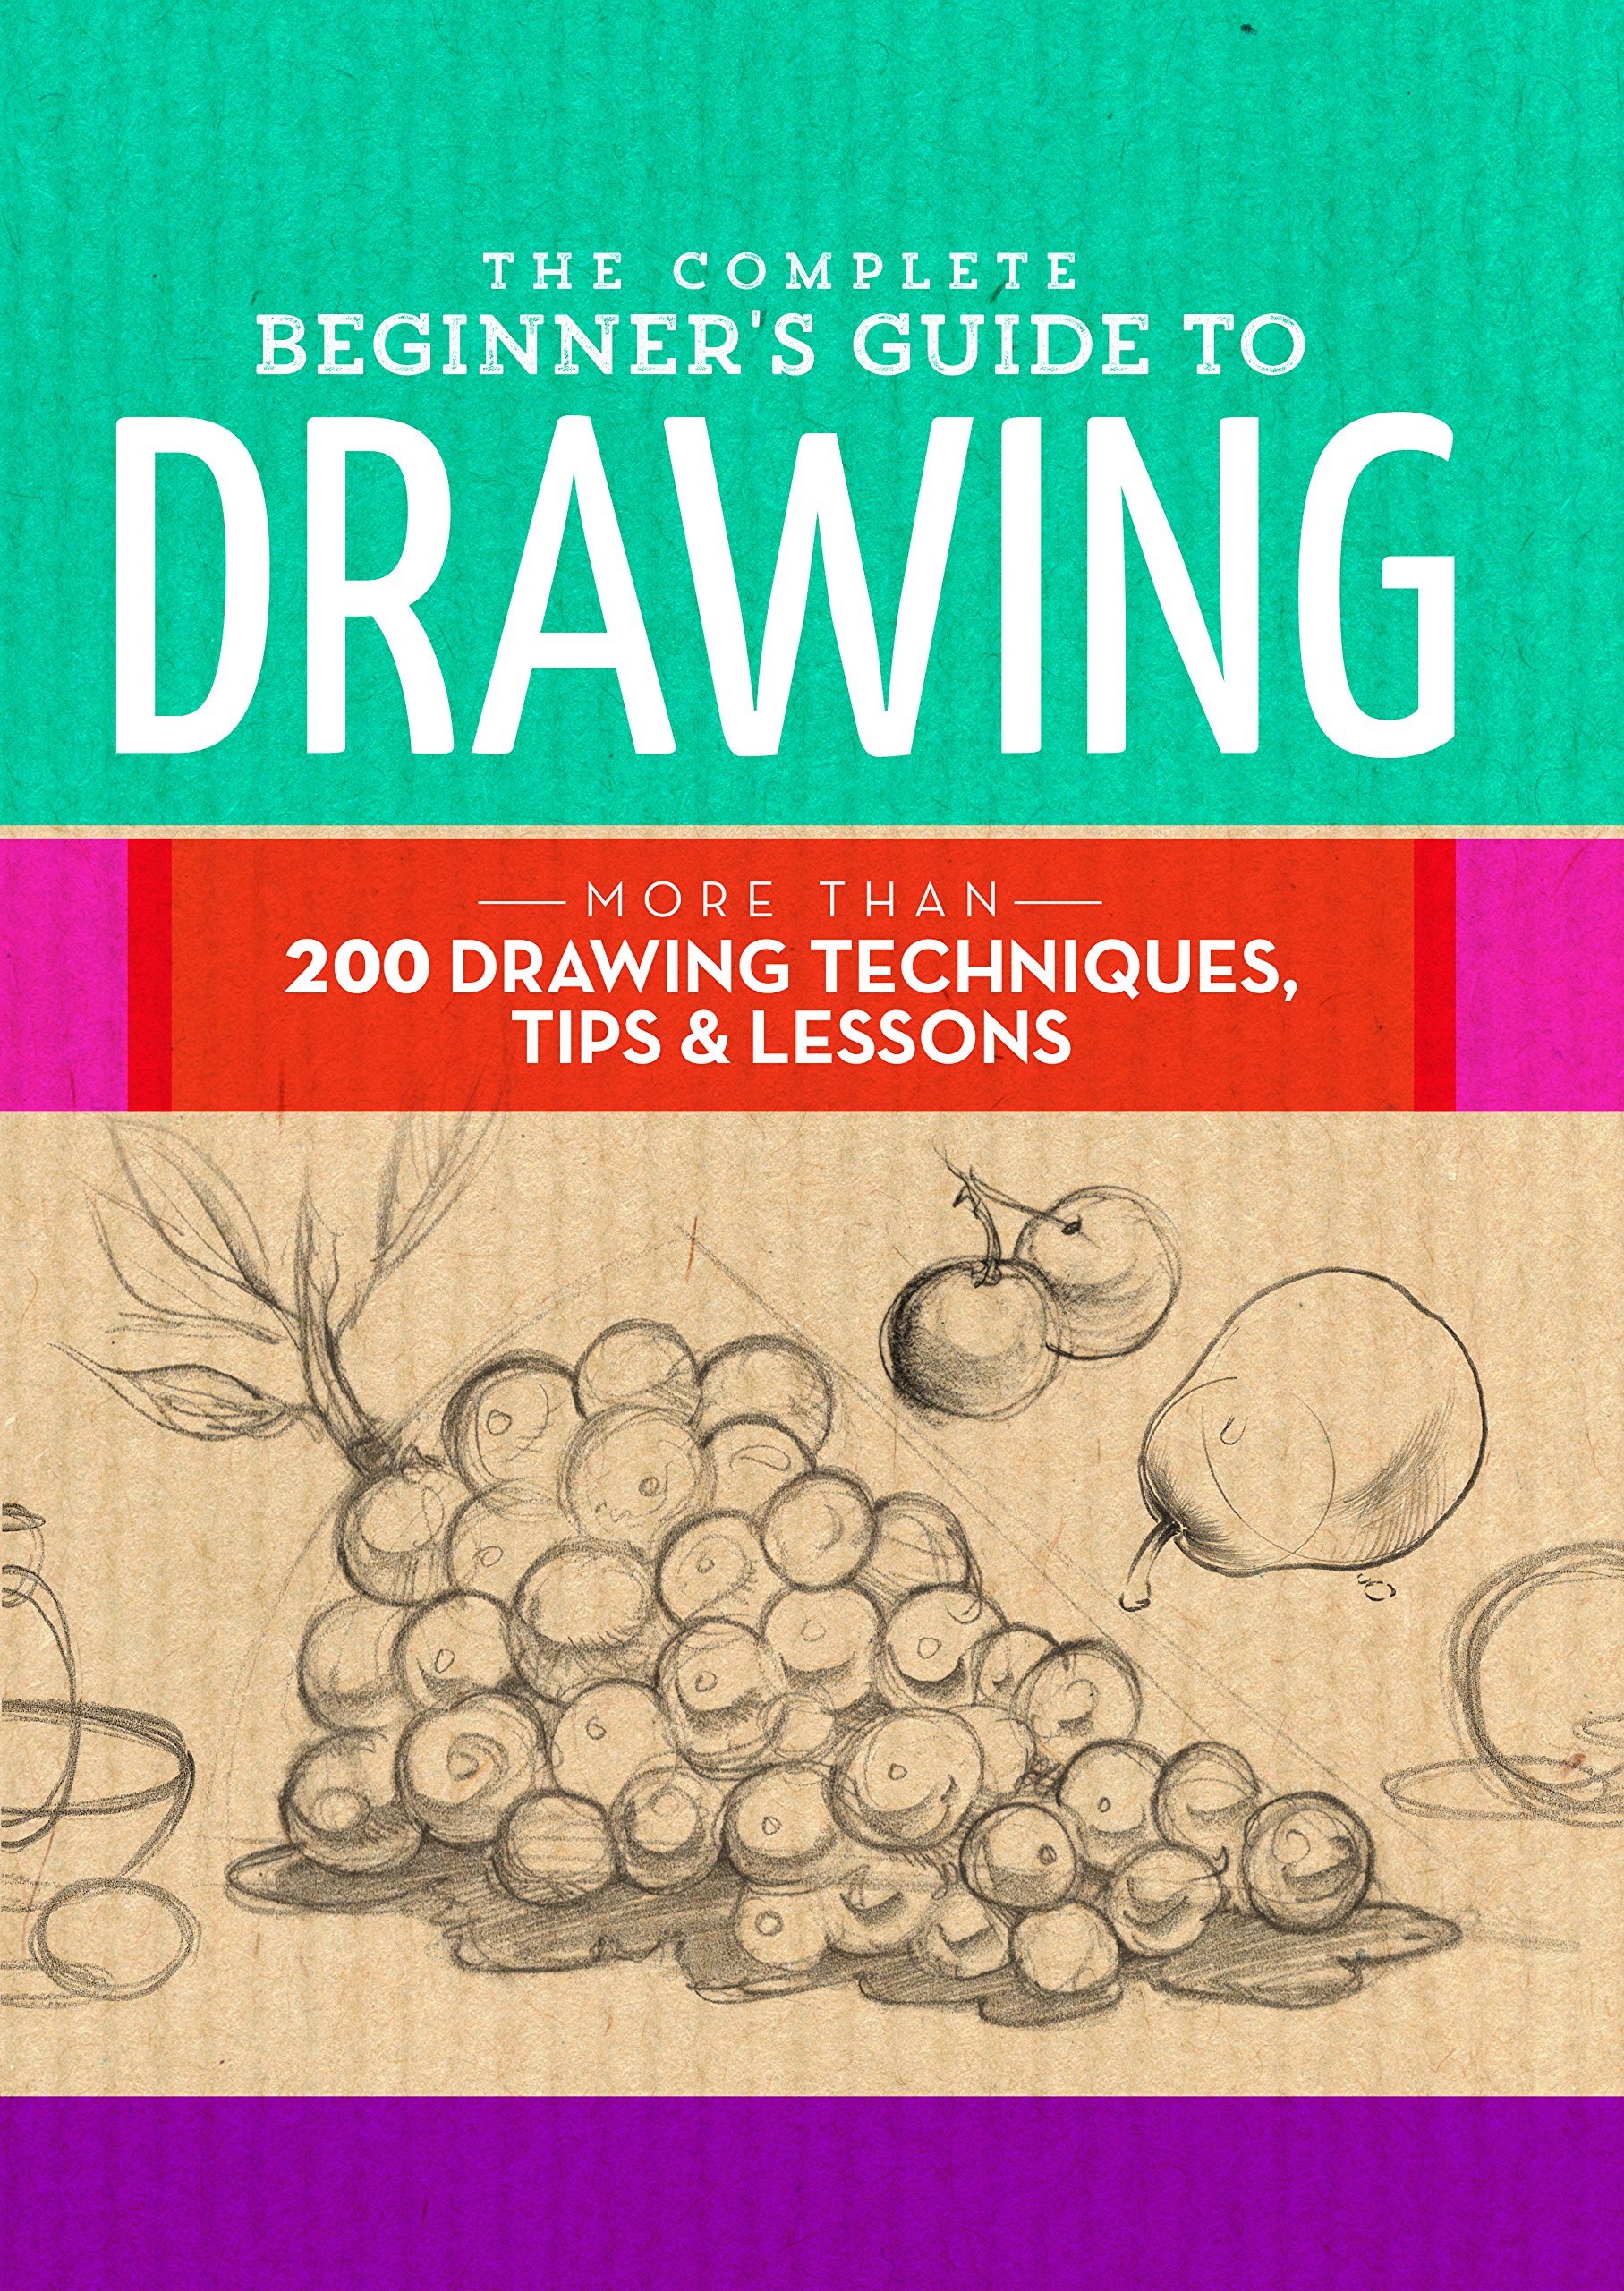 great-drawing-books-for-artists-and-beginners-alike-that-you-mustn-t-miss